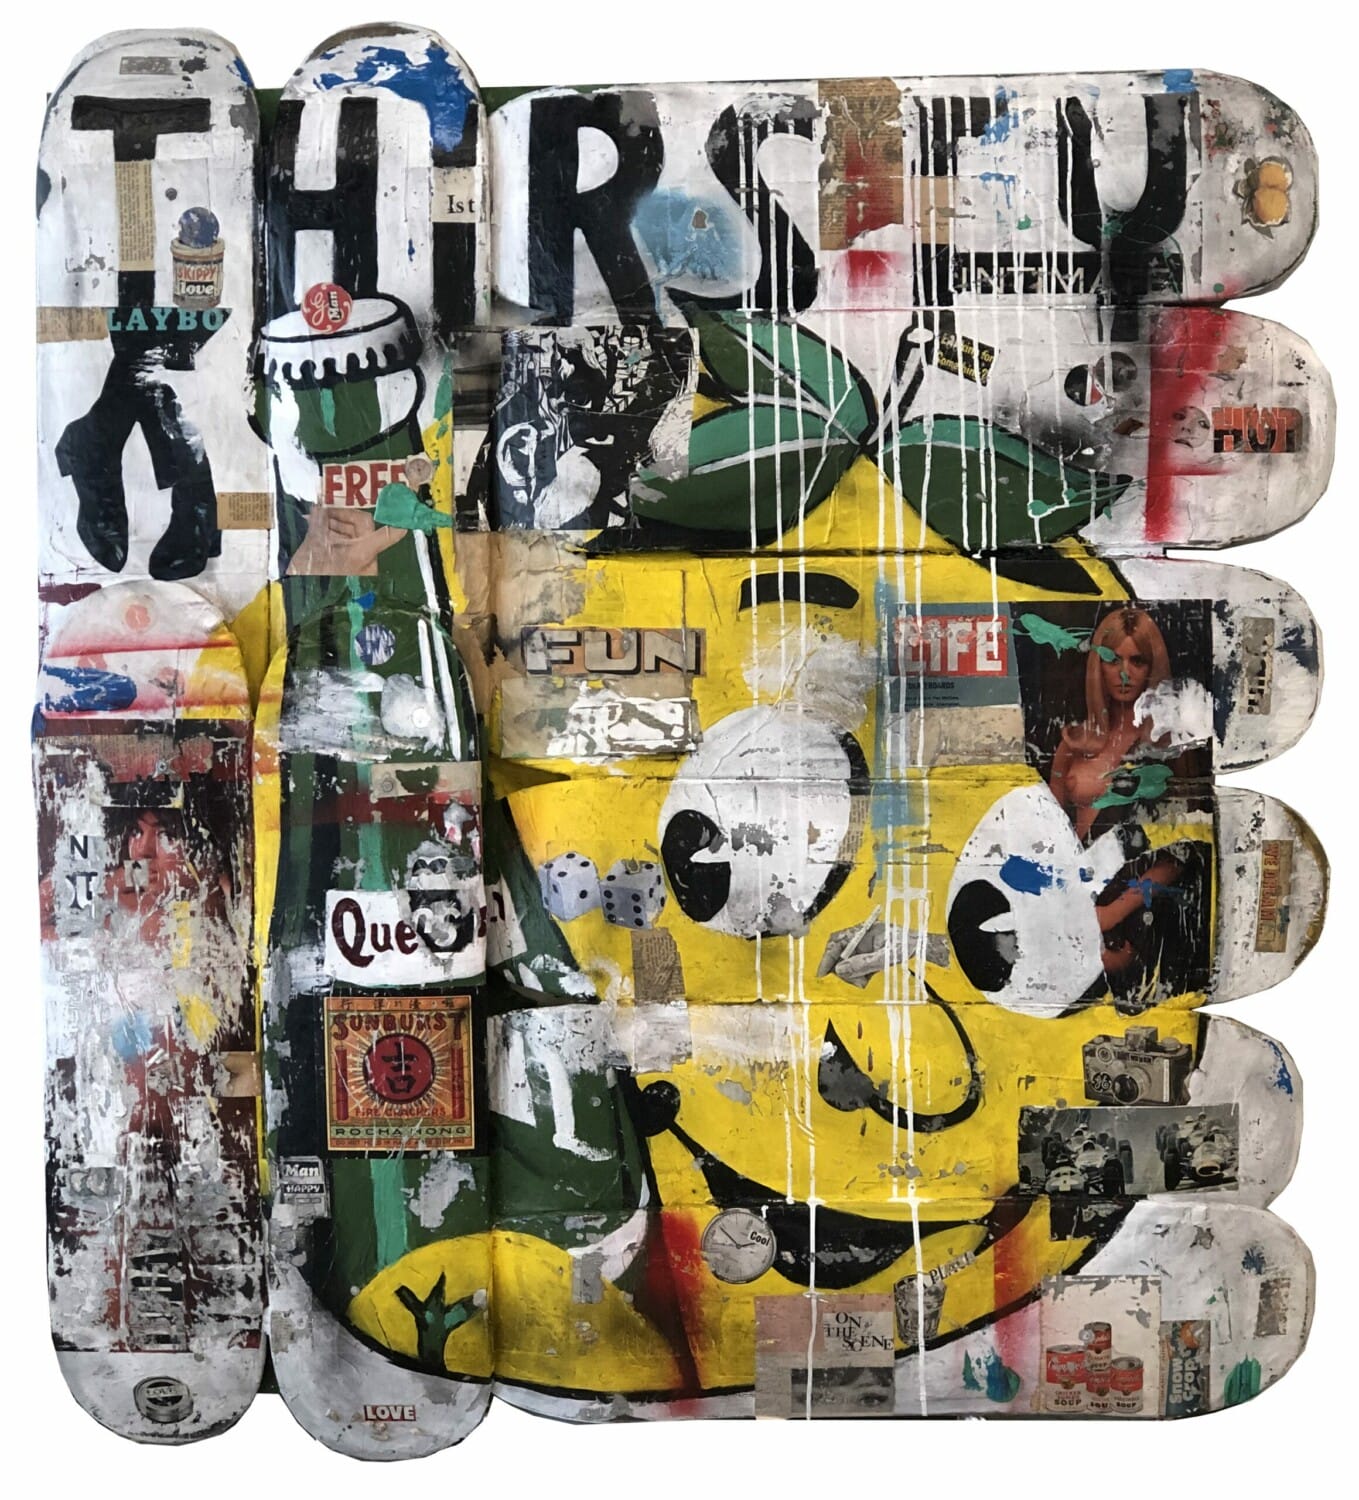 GREG MILLER Thirsty Acrylic, Spray Paint + Collage Paper on Skateboard Planks 51 x 48 inches